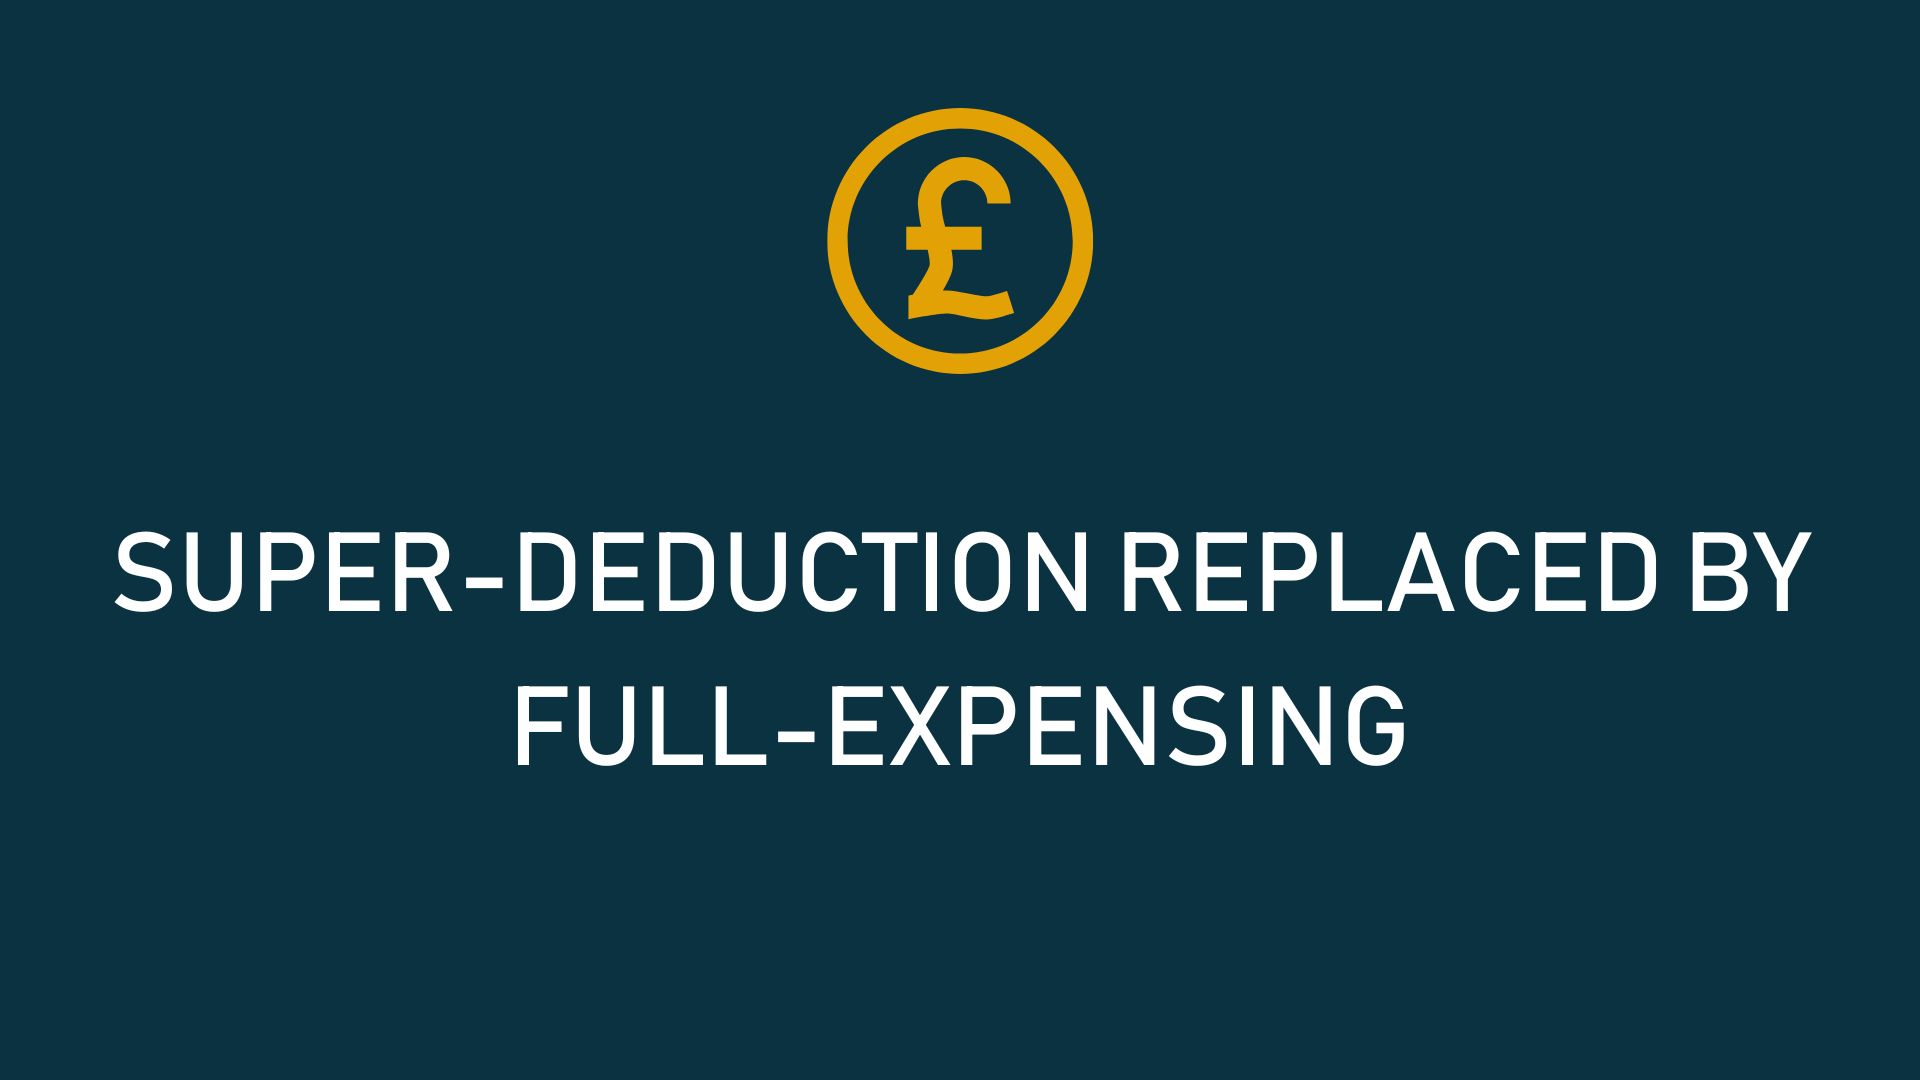 You are currently viewing SUPER-DEDUCTION REPLACED BY FULL-EXPENSING